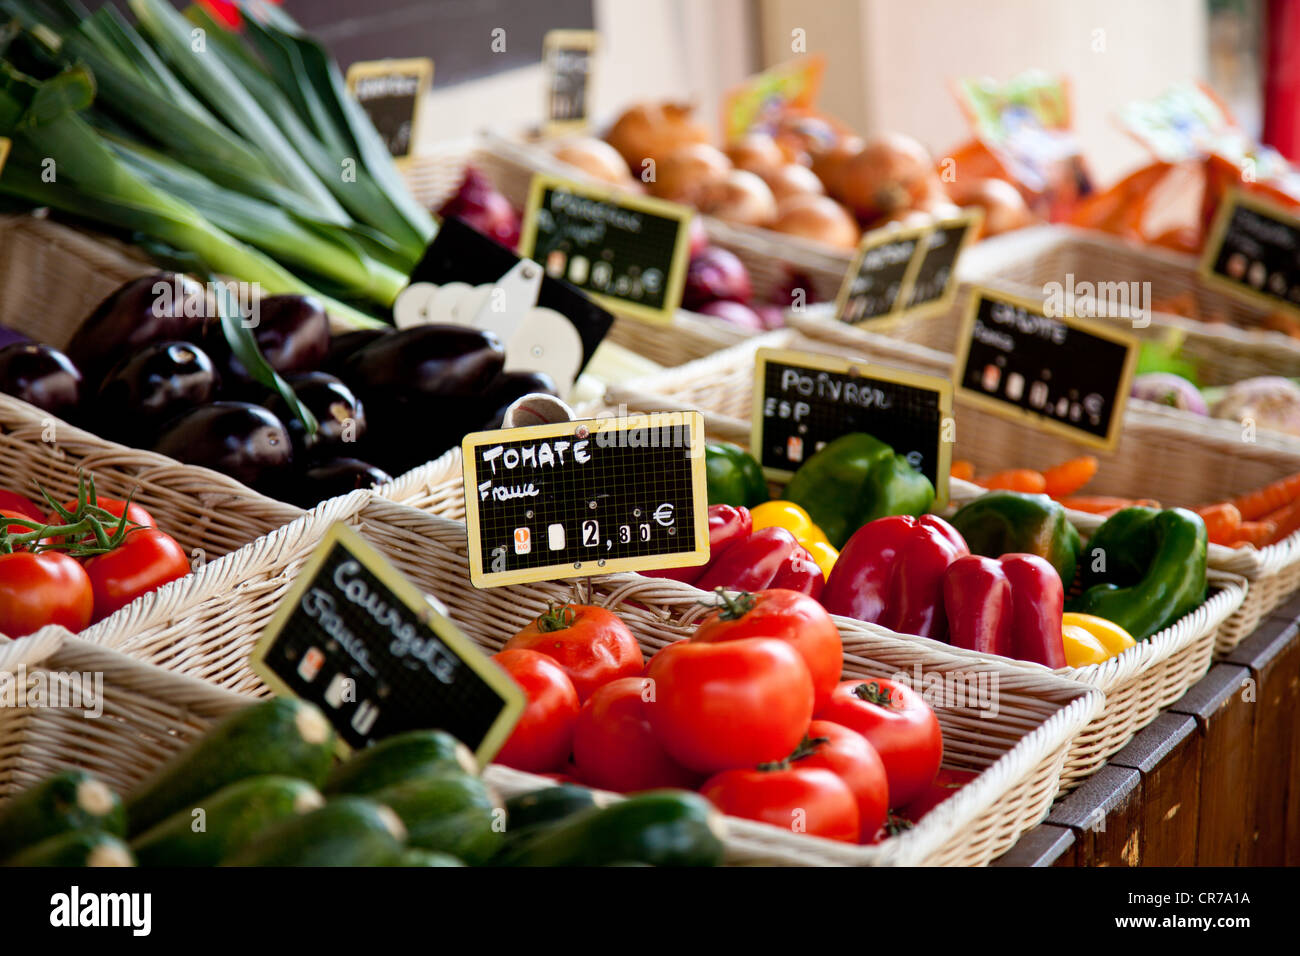 Traditional provencal market stall. Stock Photo